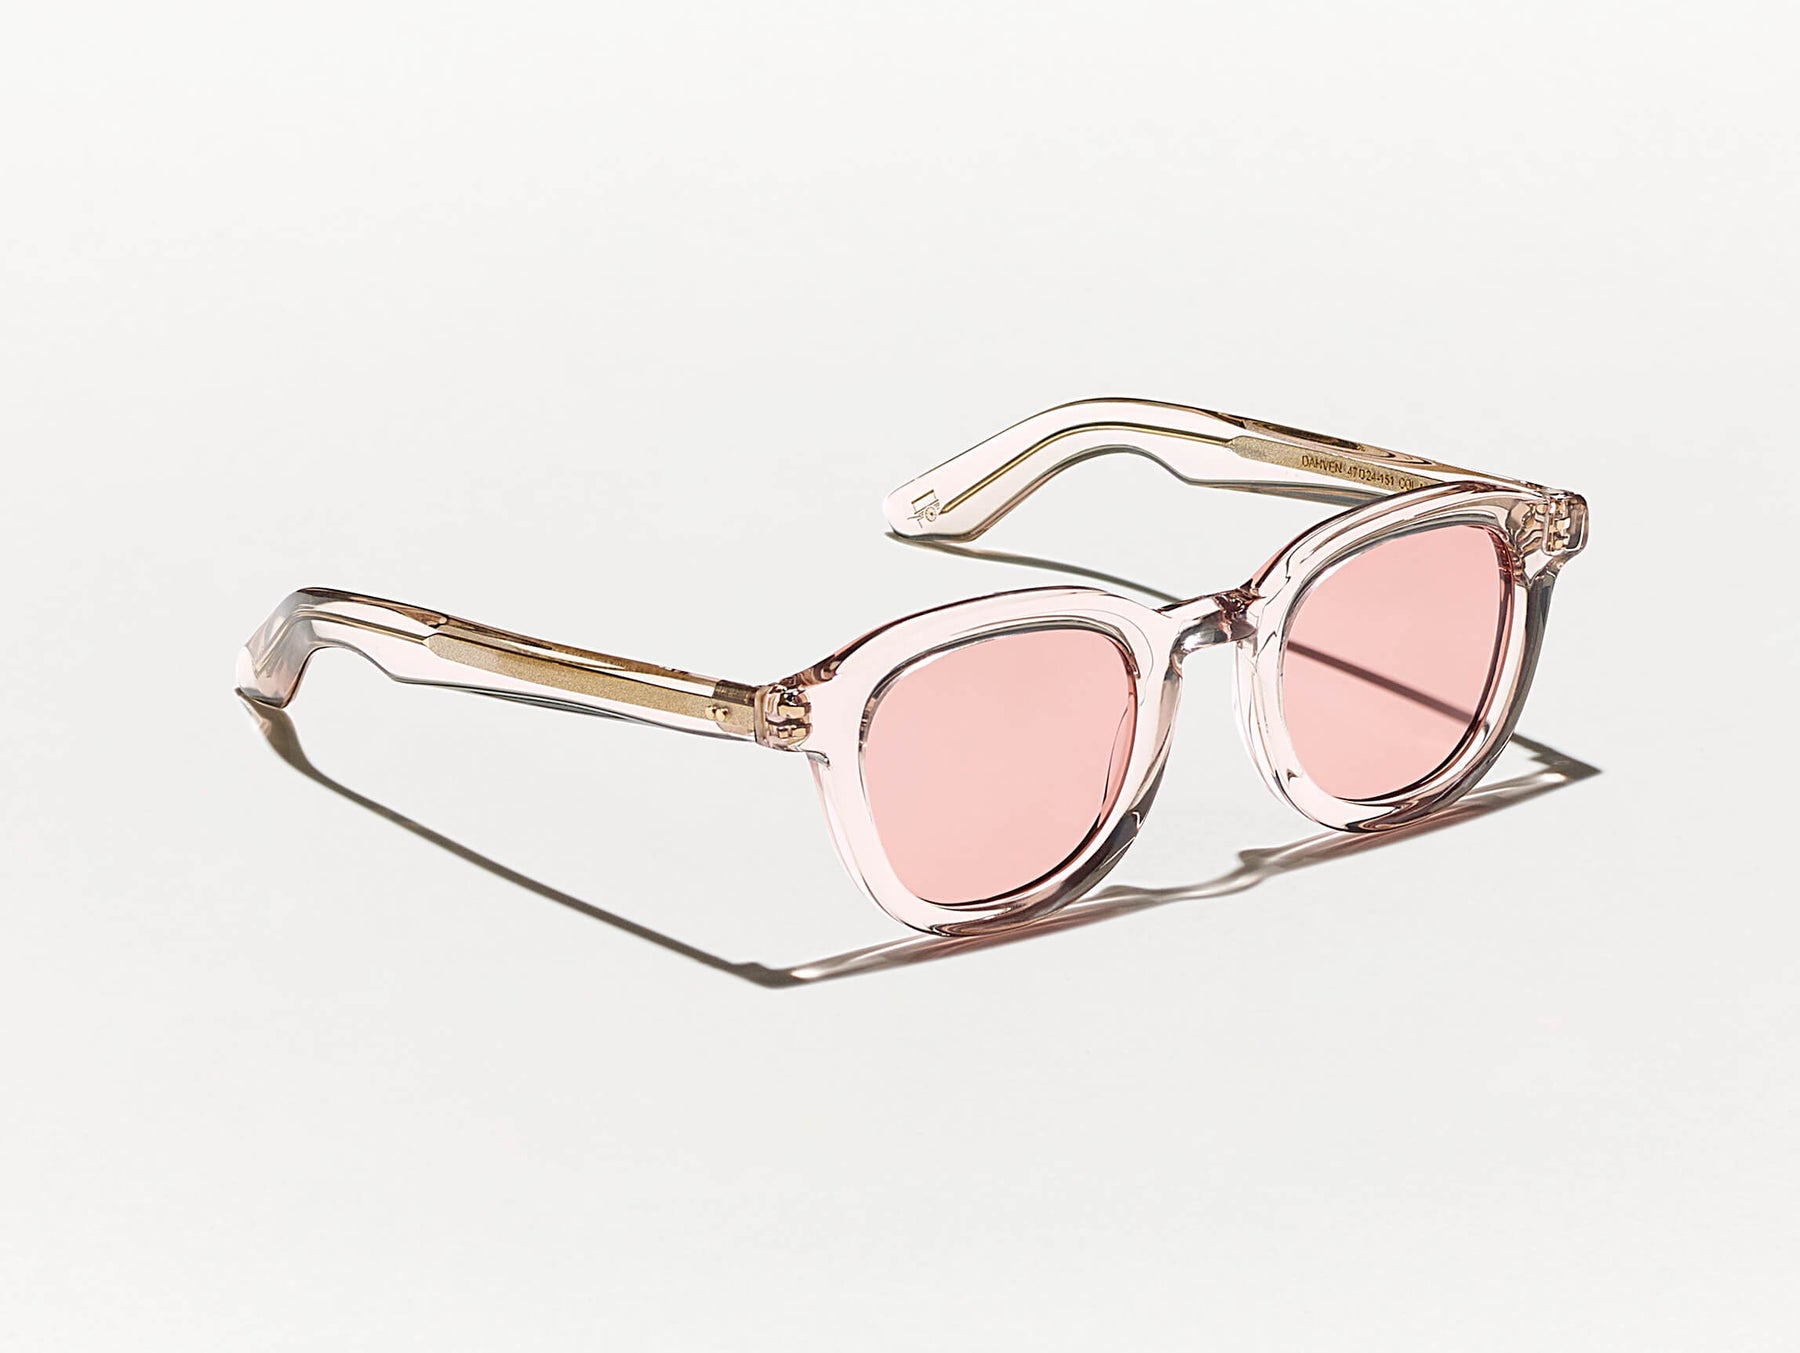 The DAHVEN Pastel with New York Rose Tinted Lenses